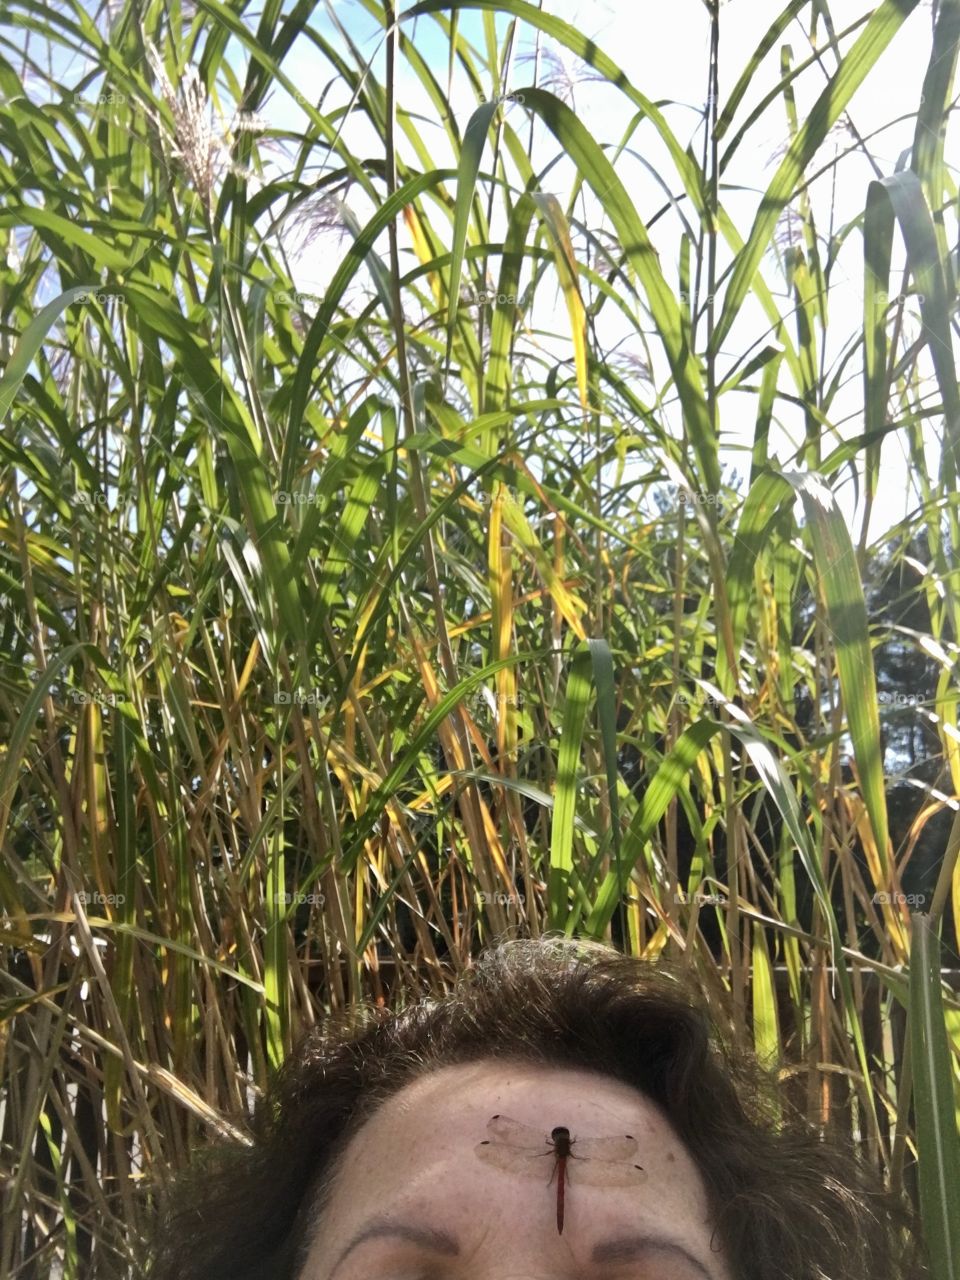 Dragonfly lands on my forehead while I'm taking pics if grasses.....what a riot!